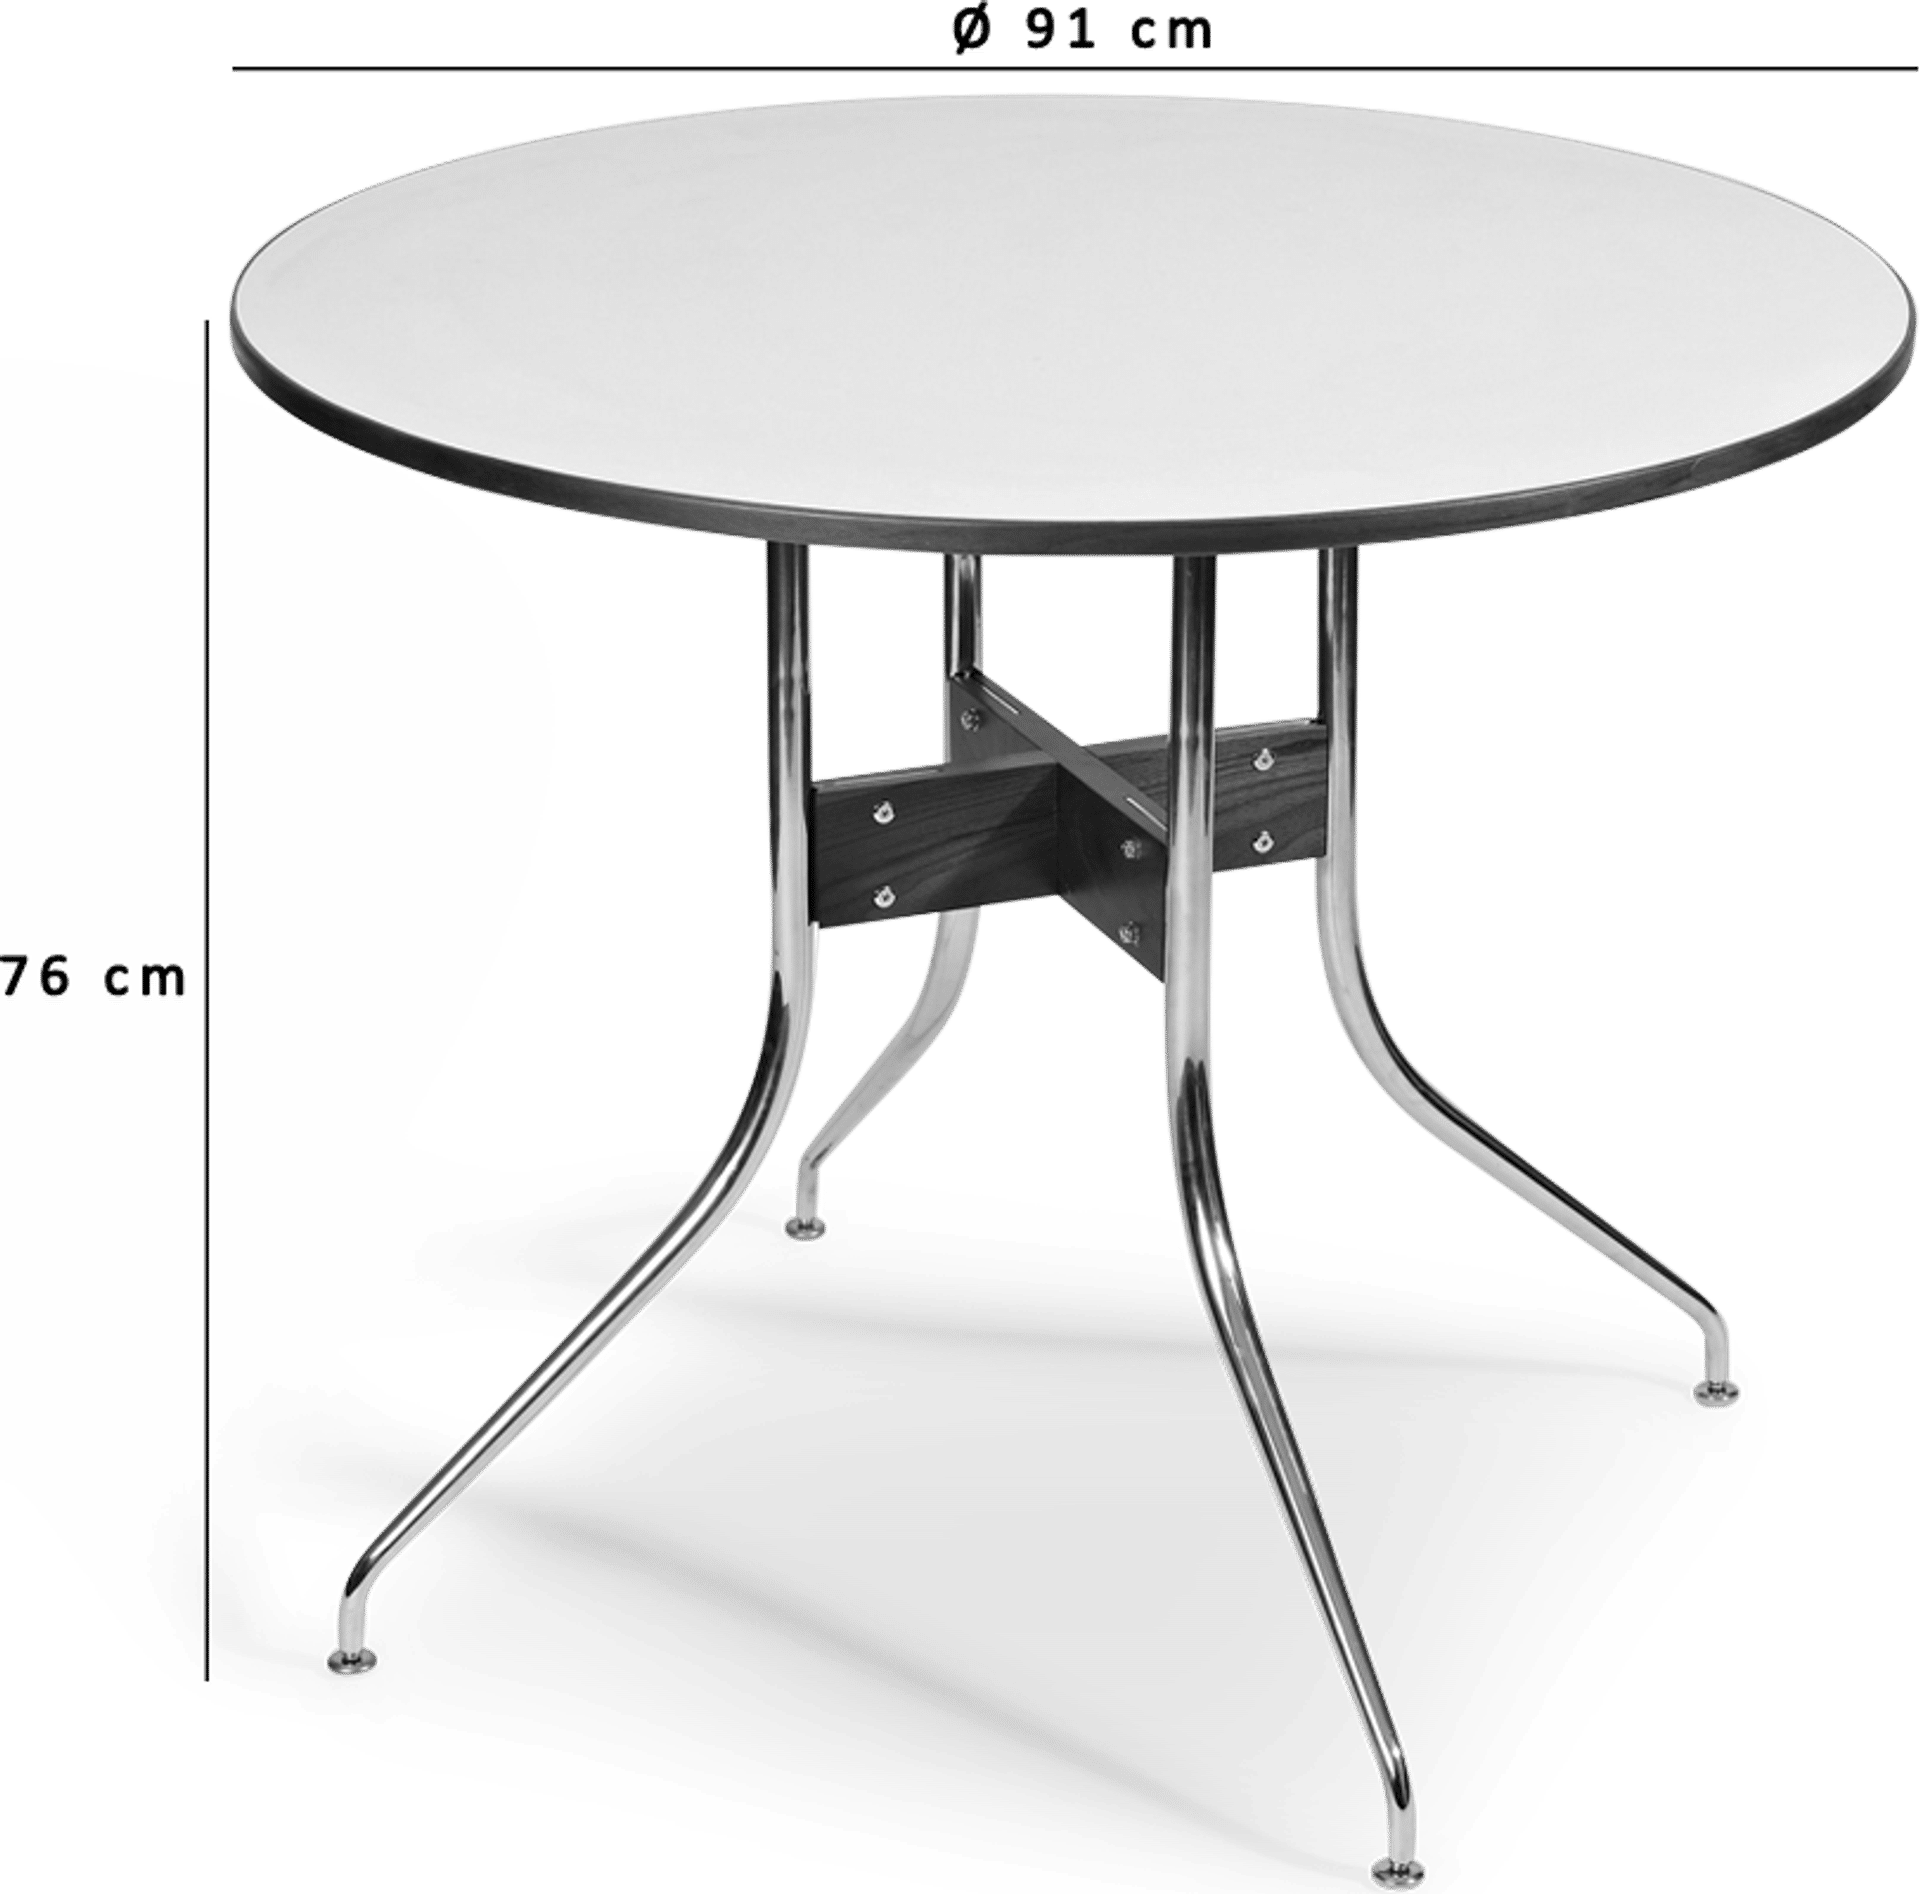 Swag Leg Dining Table